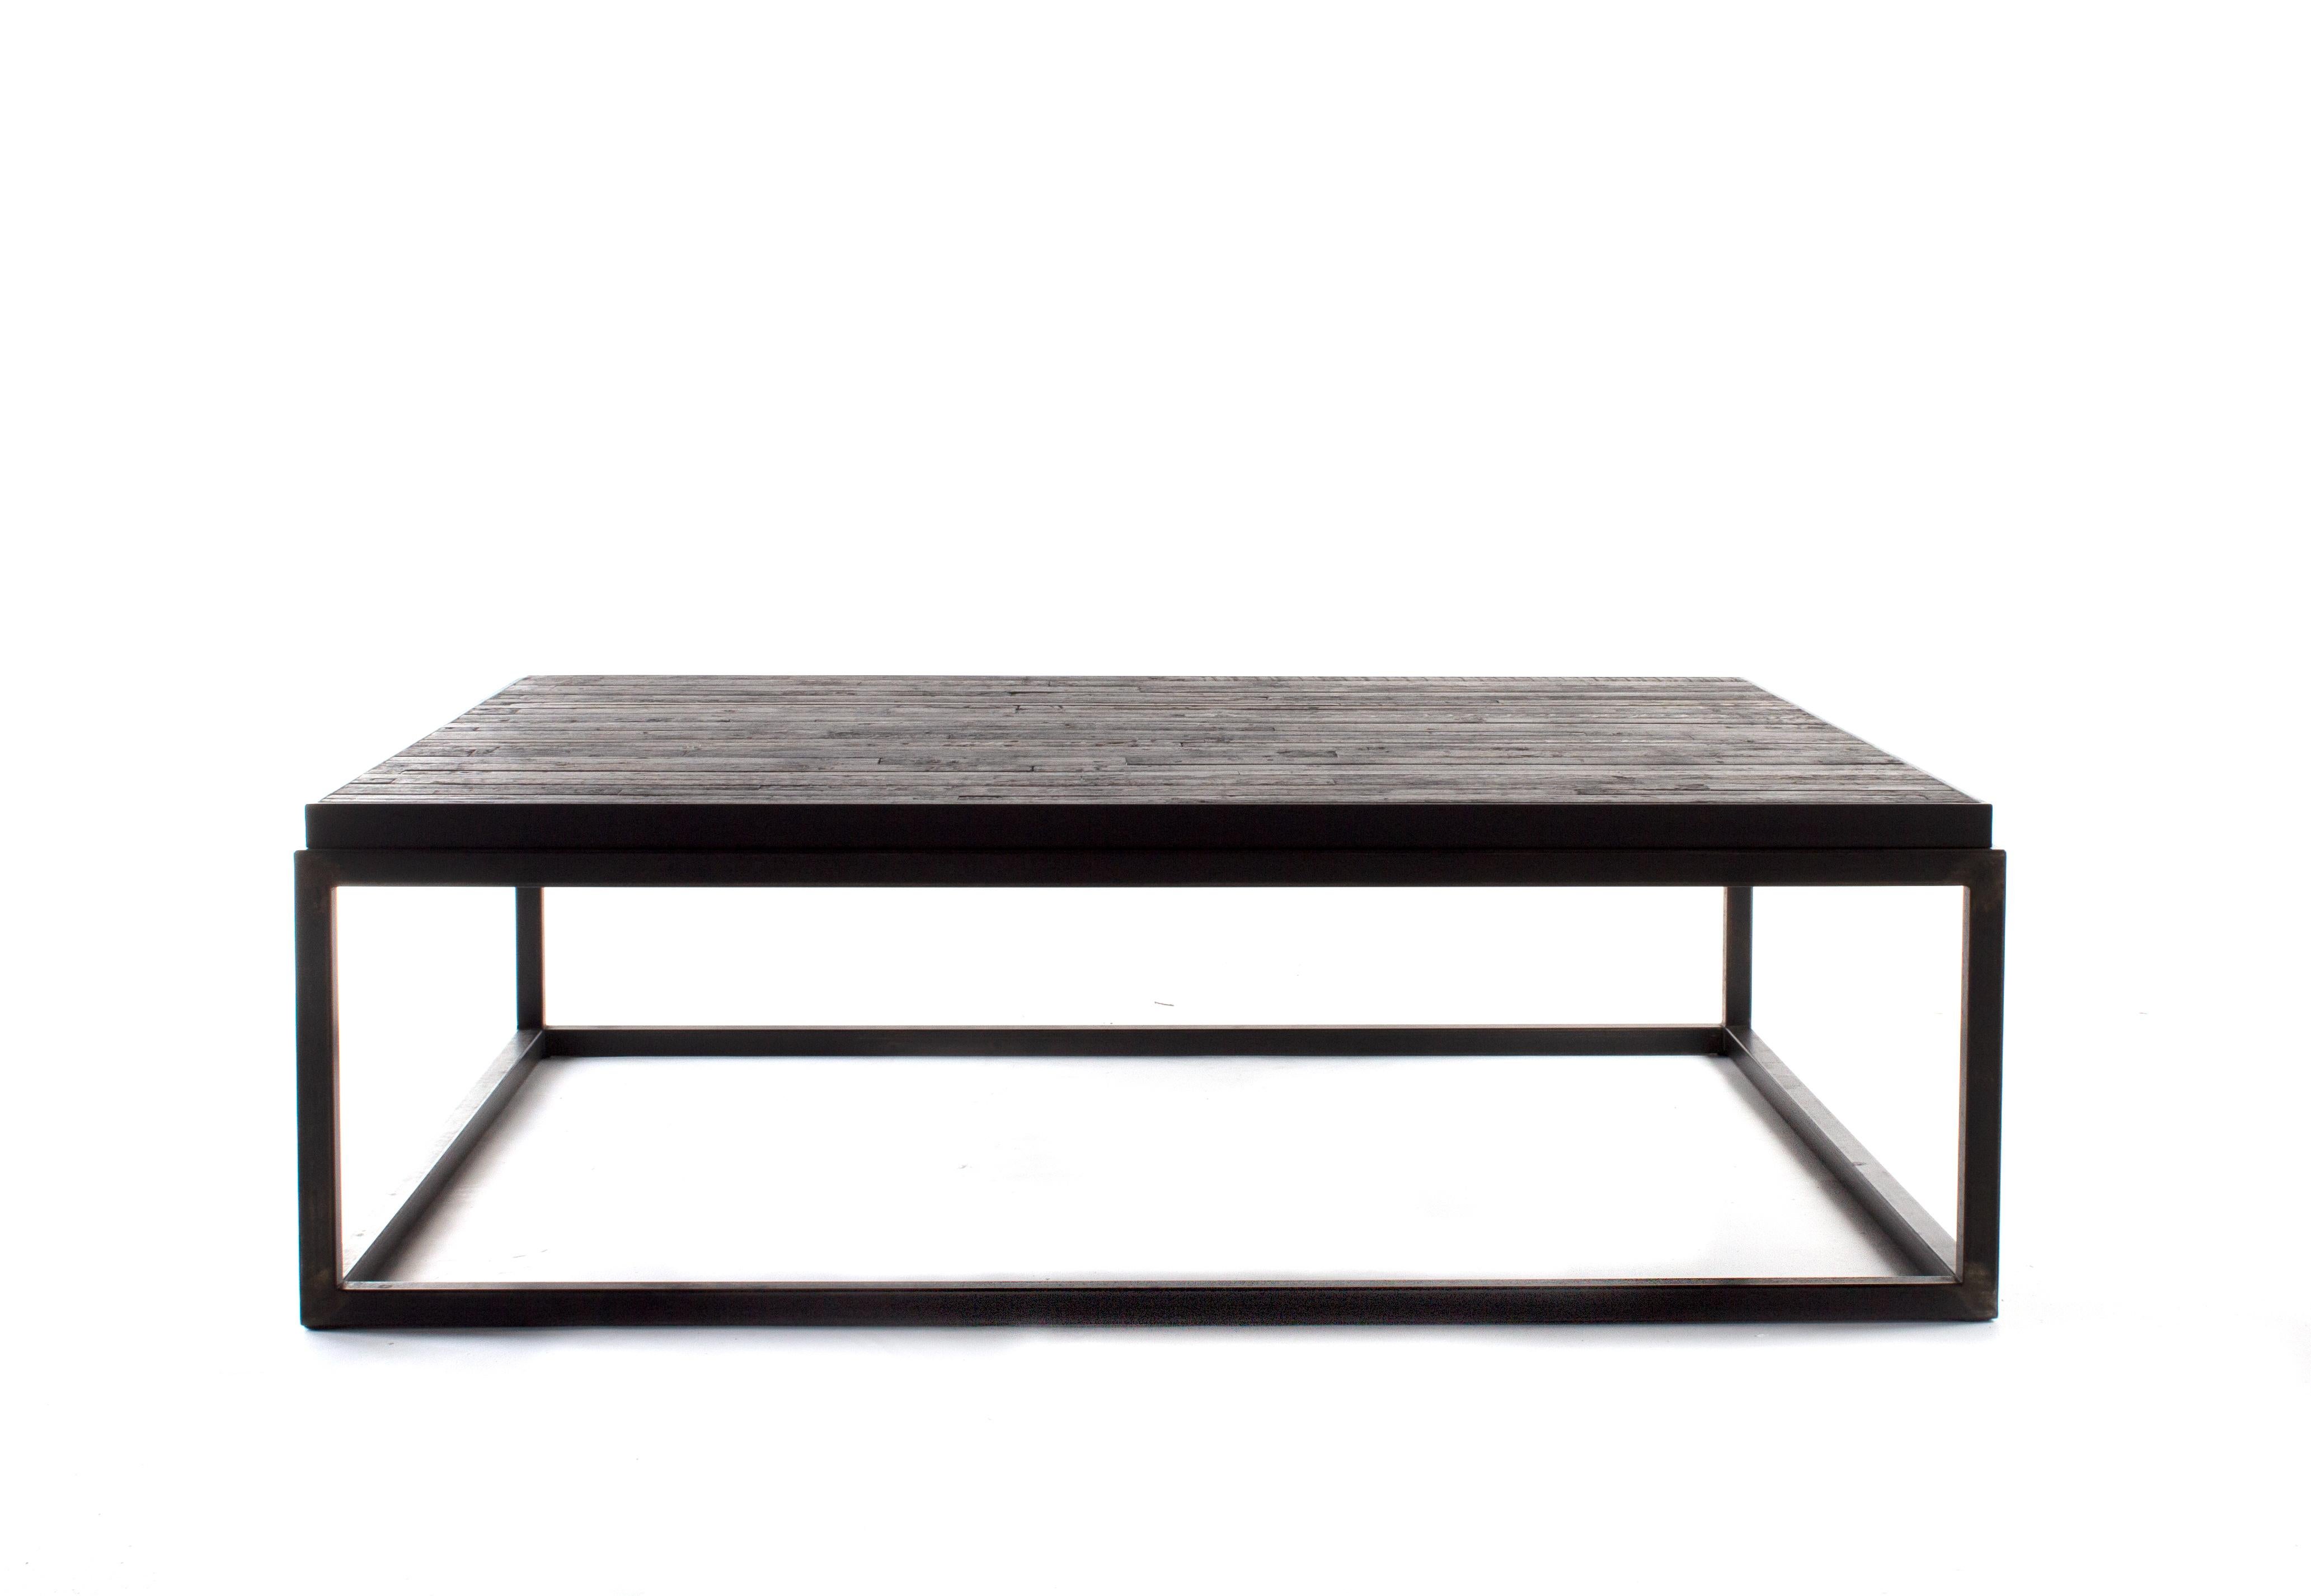 Bring a touch of the bygone era to your living space with our beautiful antique train coffee table. With a rustic, natural finish and industrial edge, this piece is sure to be an instant conversation starter in your living room or bar. An ebonized